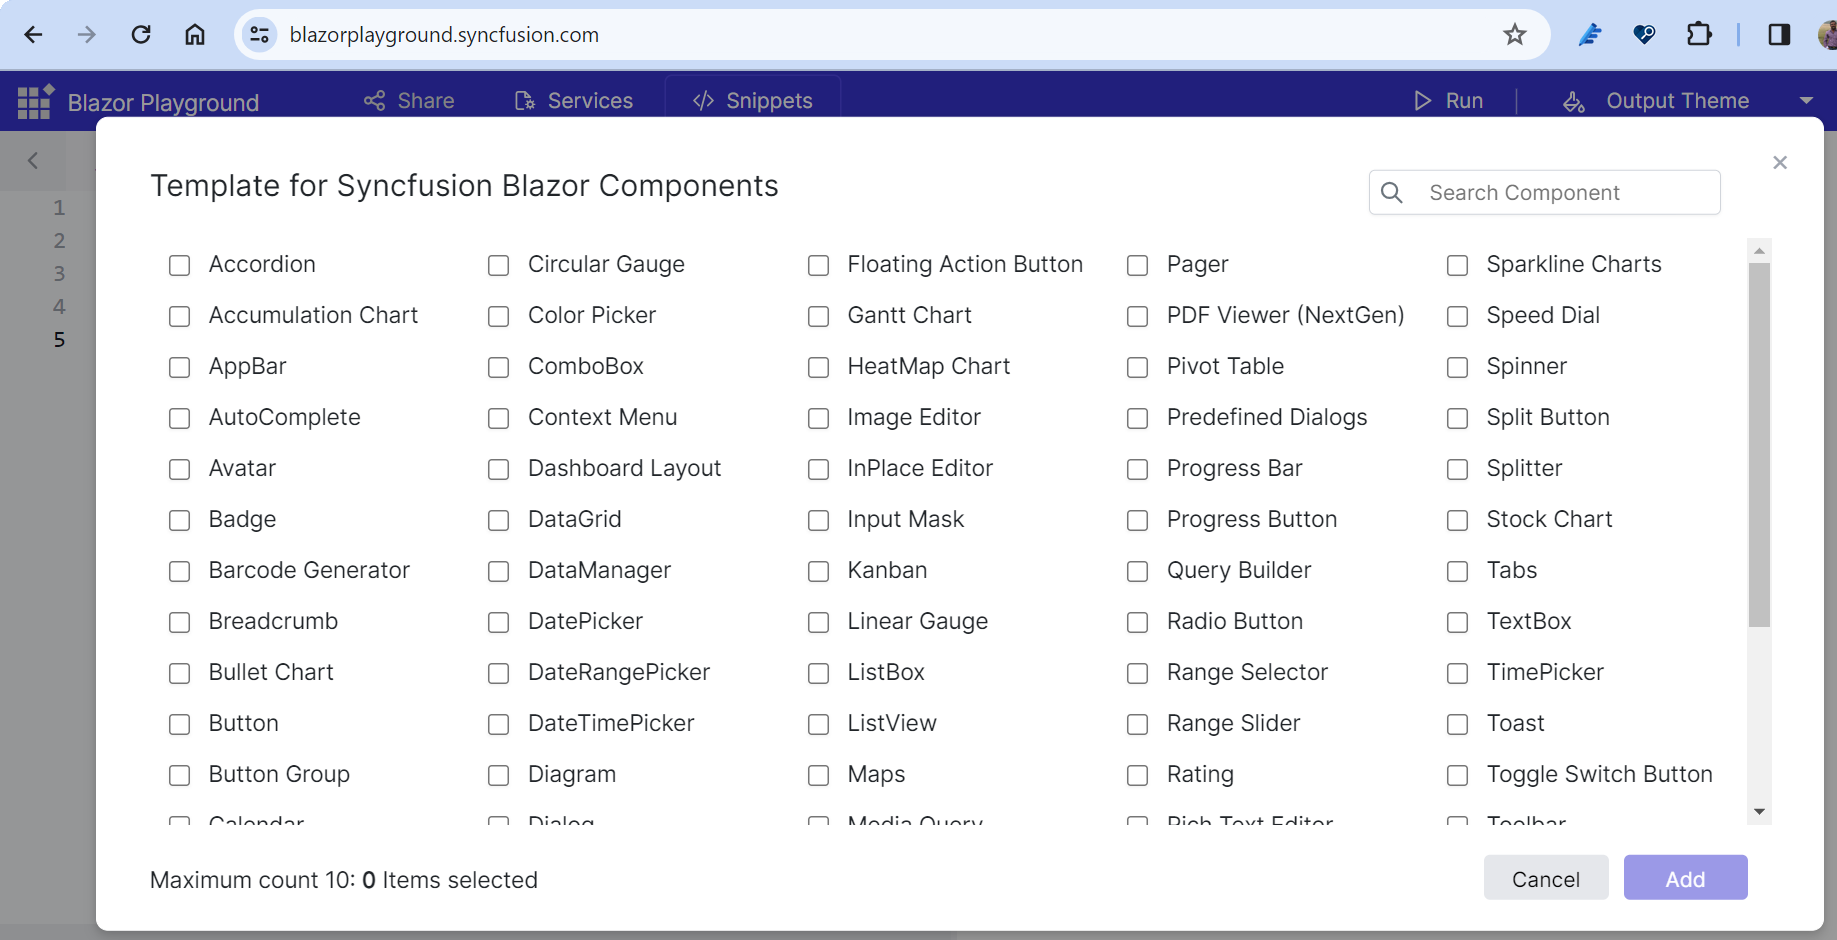 Template for Syncfusion Blazor components in Playground app